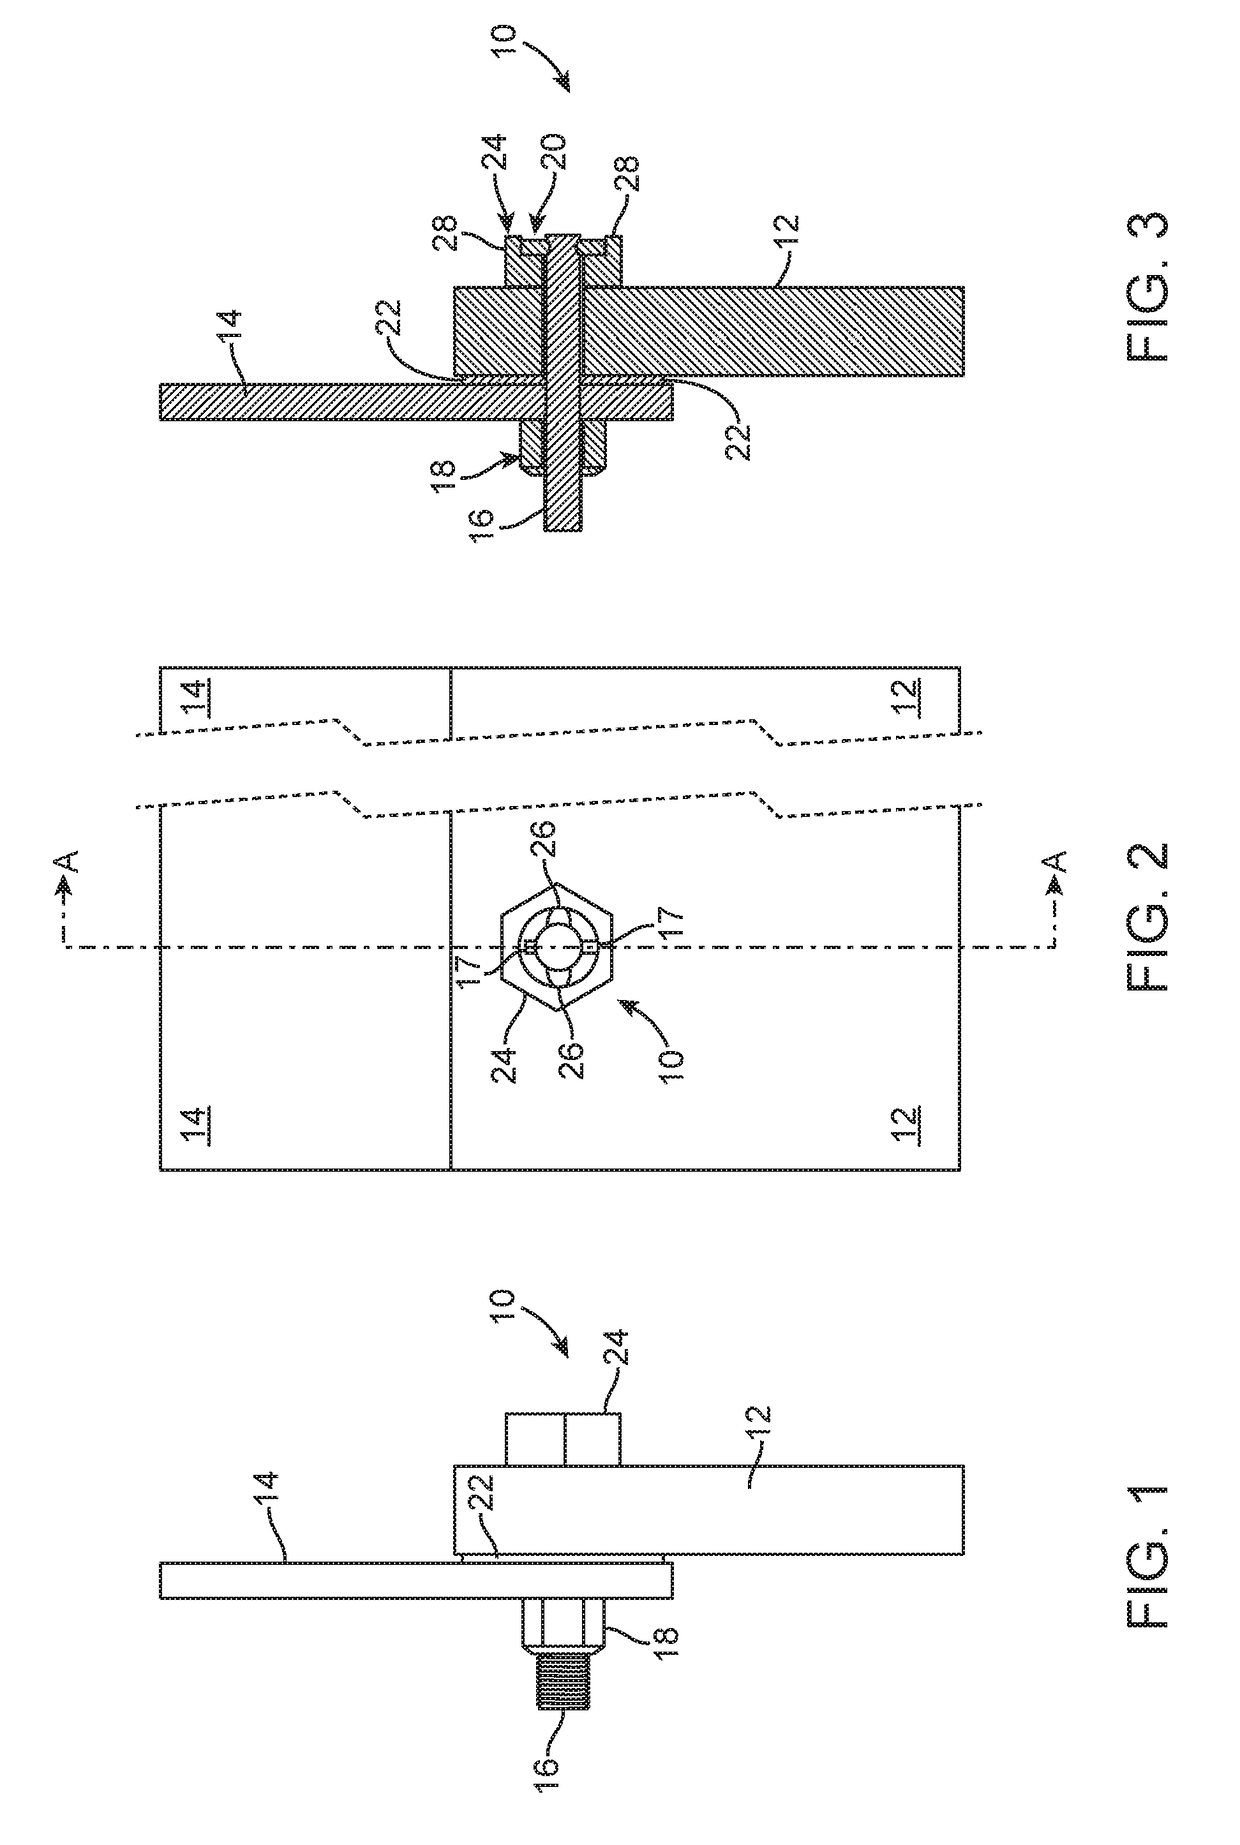 Connector for securing a snow plow blade to a supporting structure such as a moldboard